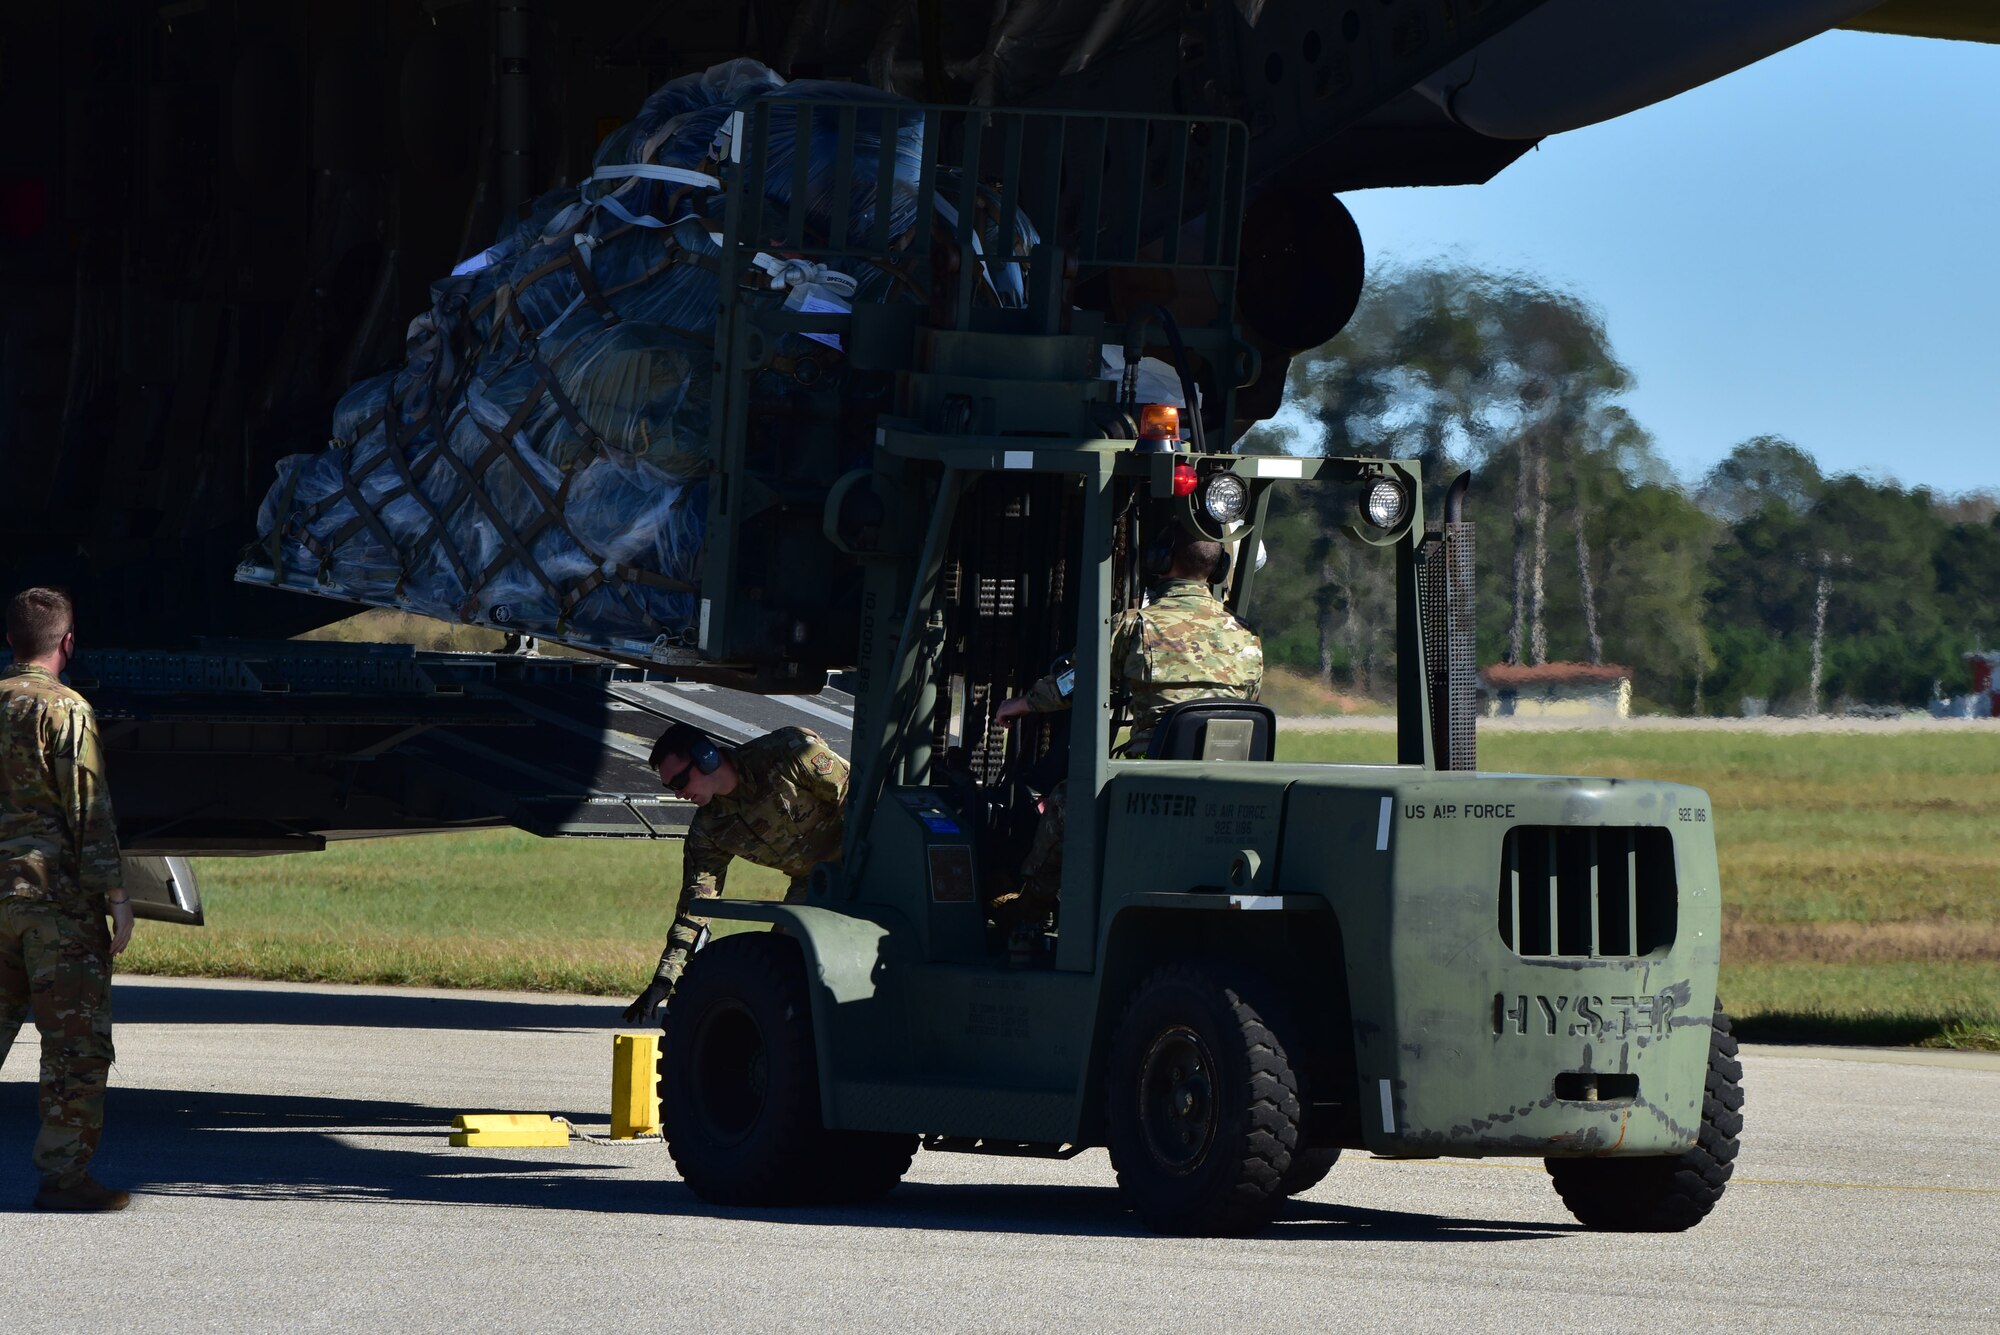 Airmen assigned to the 628th Air Base Wing begin to offload cargo from a C-17 Globemaster III at McEntire Joint National Guard Base, S.C., Nov. 16, 2020. Palmetto Challenge is a global mobilization exercise held at McEntire Joint National Guard Base, S.C., and Pope Army Airfield, N.C. The exercise is held in order to develop readiness and awareness in a simulated deployed environment for over 100 Airmen from Joint Base Charleston.